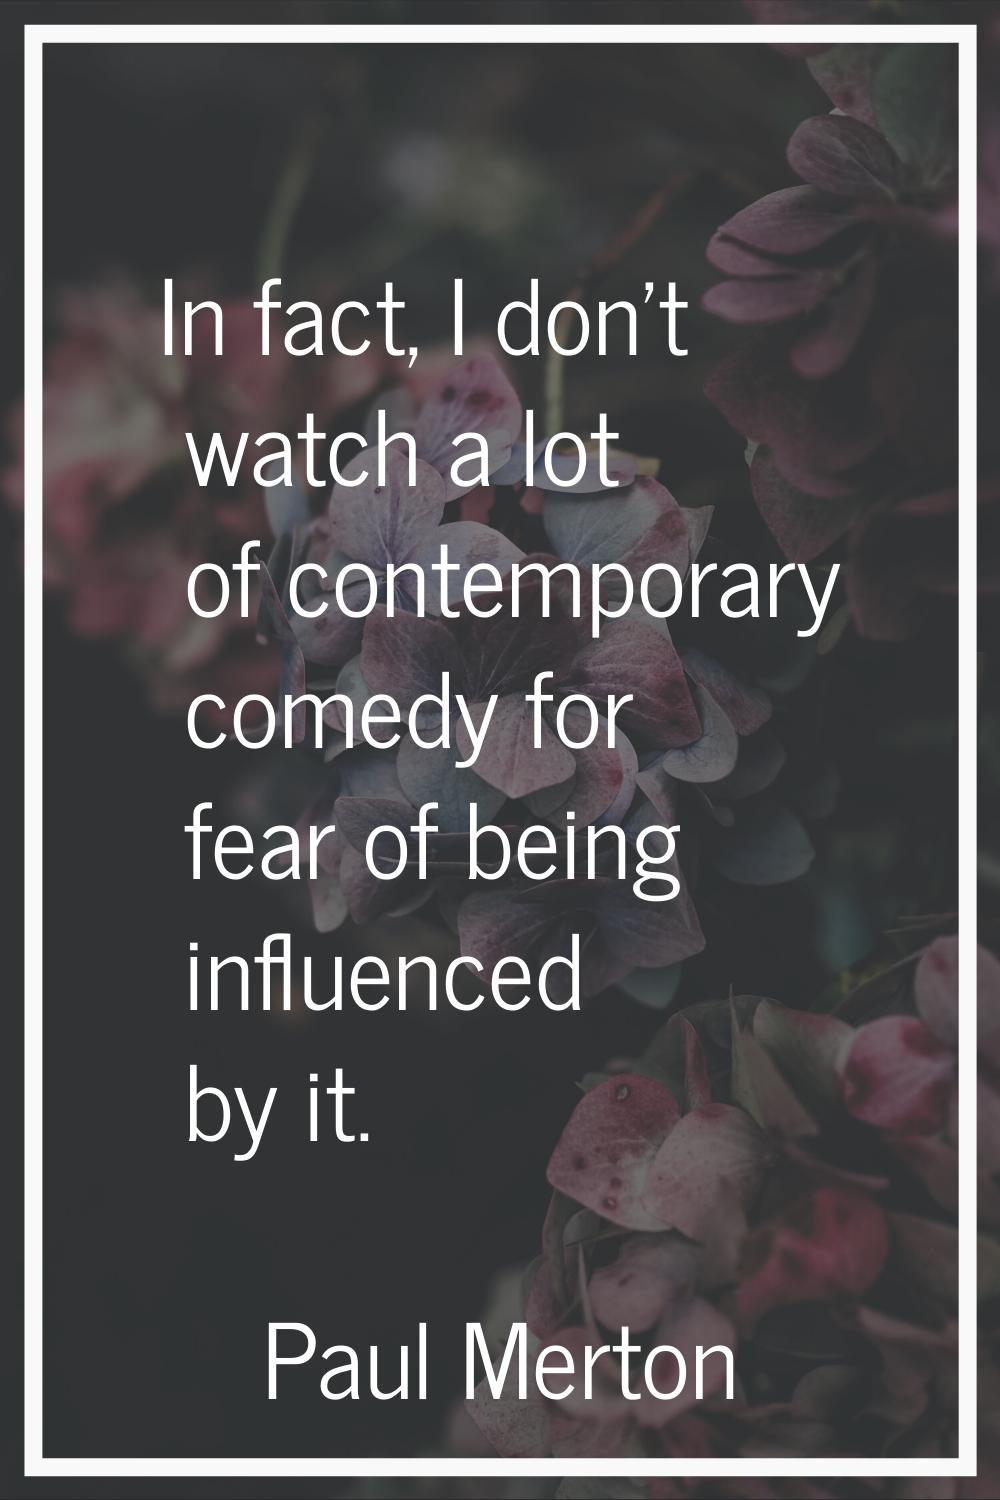 In fact, I don't watch a lot of contemporary comedy for fear of being influenced by it.